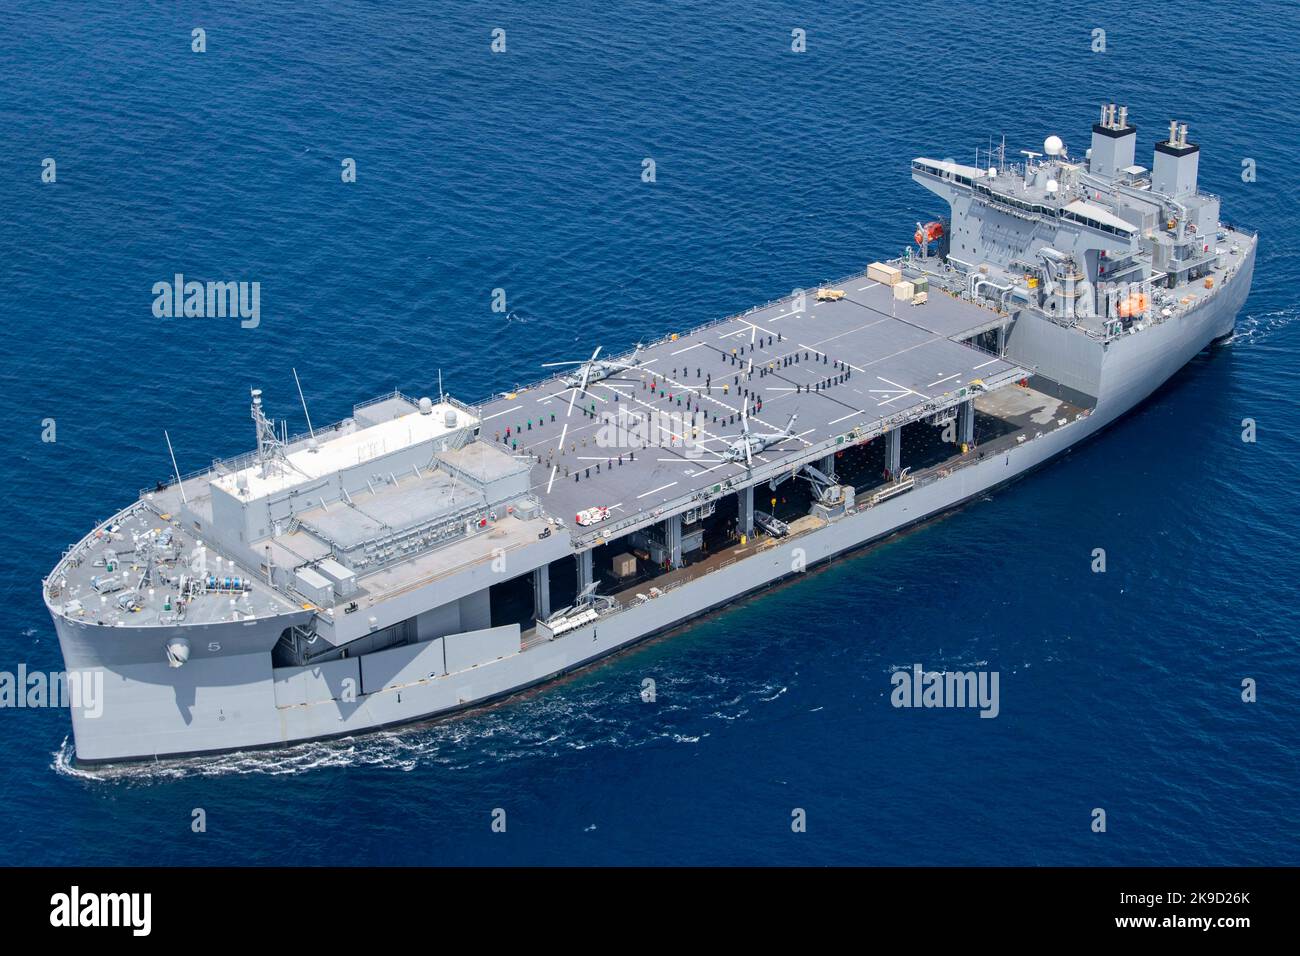 USS Miguel Keith (ESB 5) U.S. Navy. USS Miguel Keith (ESB-5) (formerly USNS Miguel Keith (T-ESB-5)) is a Lewis B. Puller-class expeditionary mobile base Stock Photo